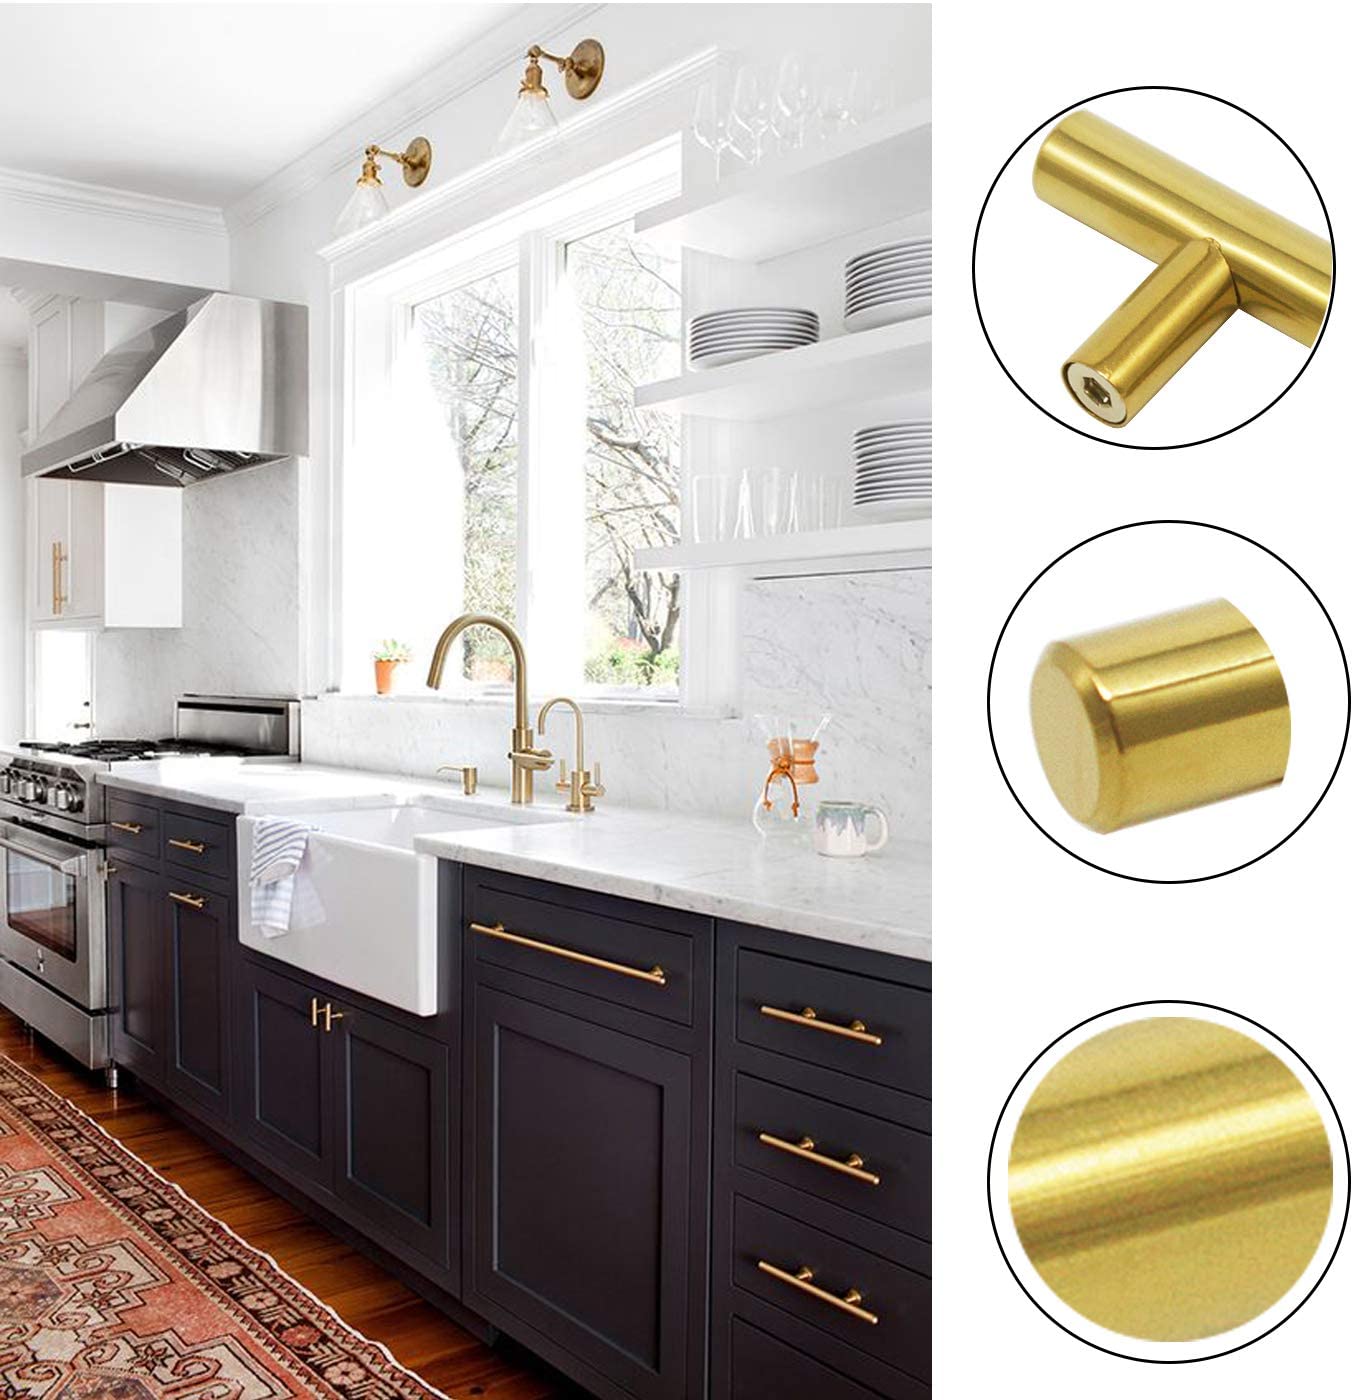 Single Hole T Bar Cabinet Knobs 5 Pack Gold Kitchen Handles Brushed Brass Cupboard Drawer Pulls 50mm/2" Overall Length. - e4cents